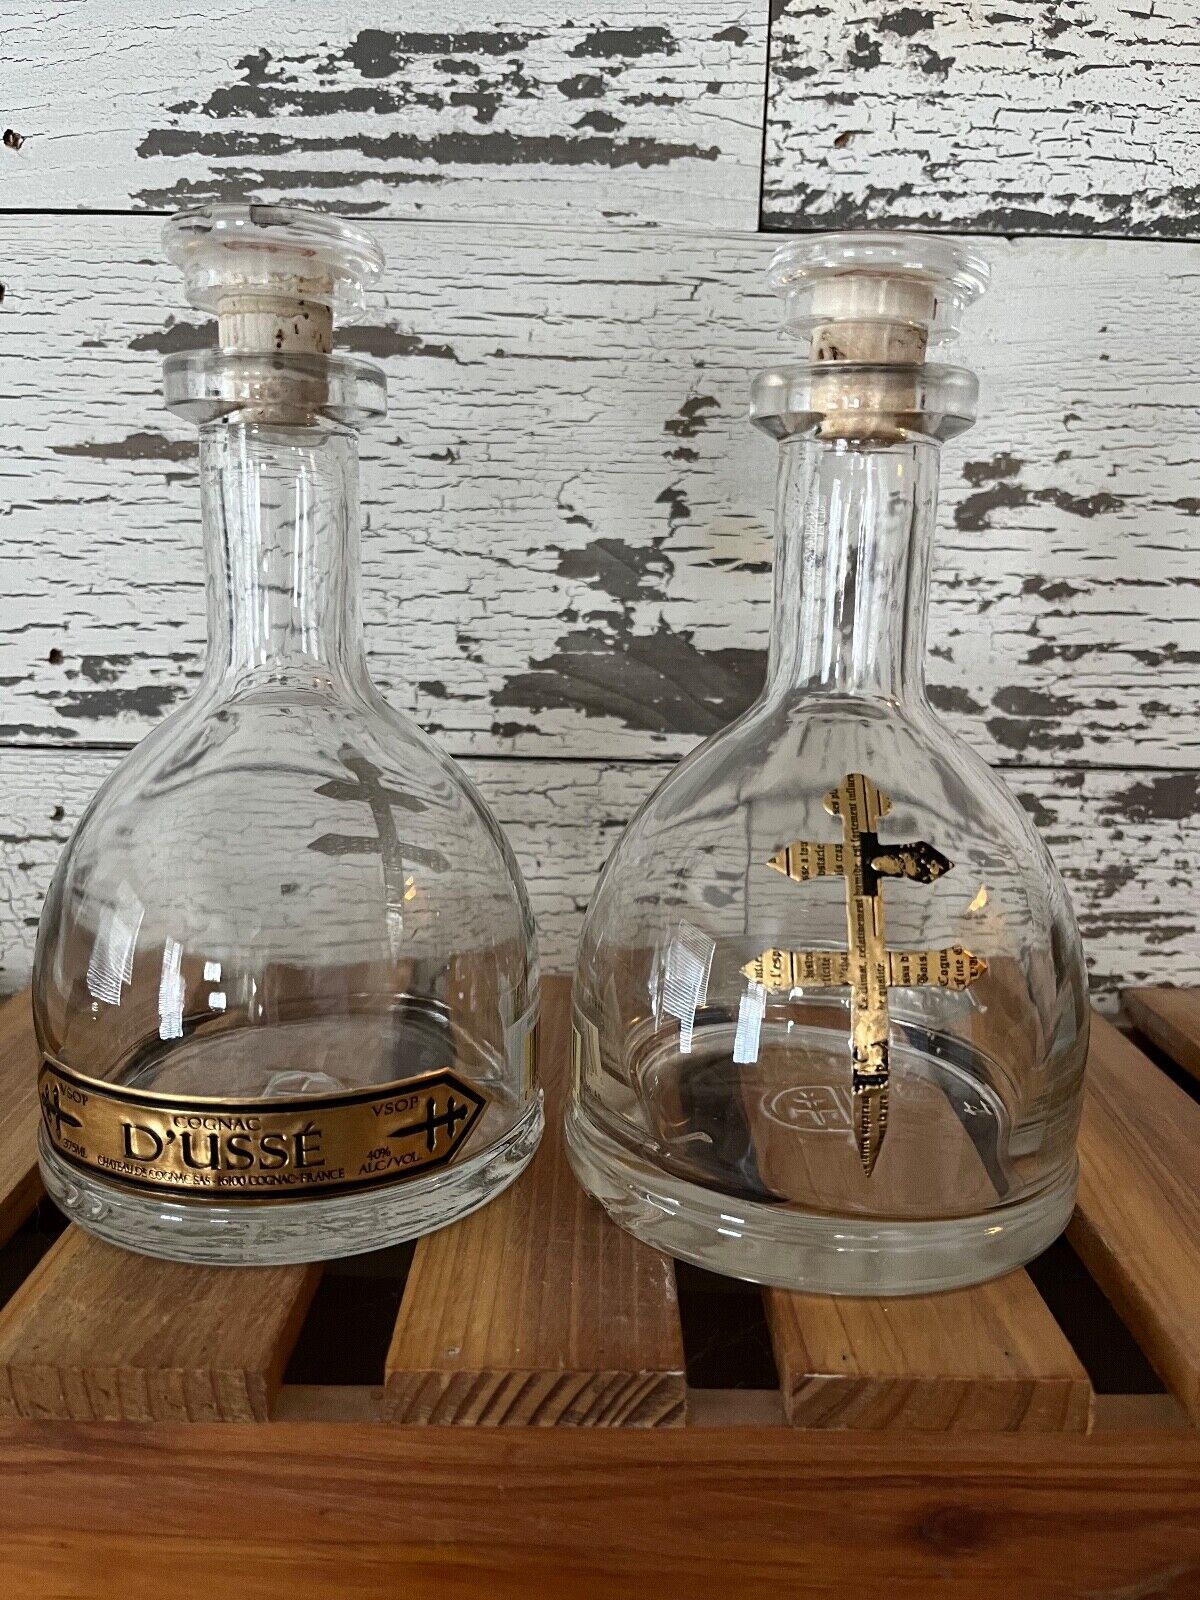 Lot of Two (2) D'USSE 750ML VSOP Cognac Bottles/Corks. Empty of any alcohol.